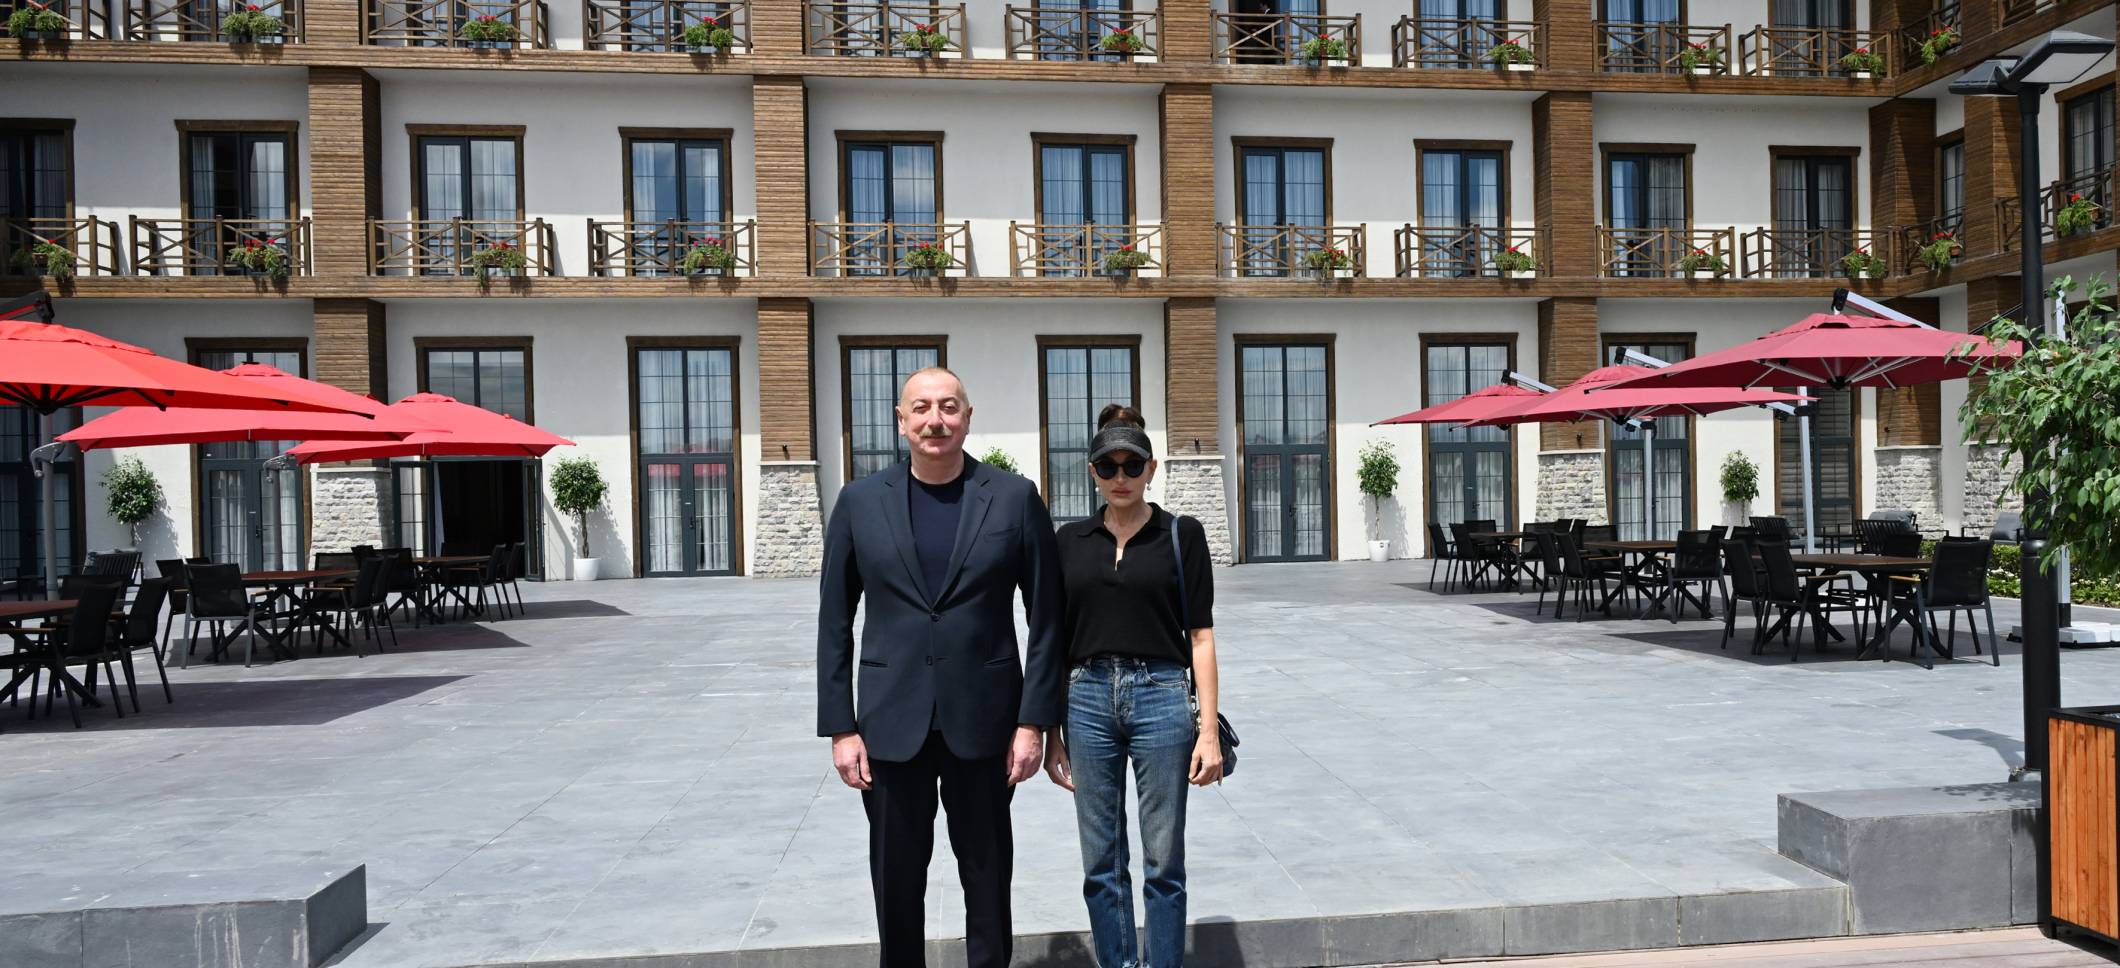 Ilham Aliyev and First Lady Mehriban Aliyeva participated in opening of Aghali hotel in Zangilan district